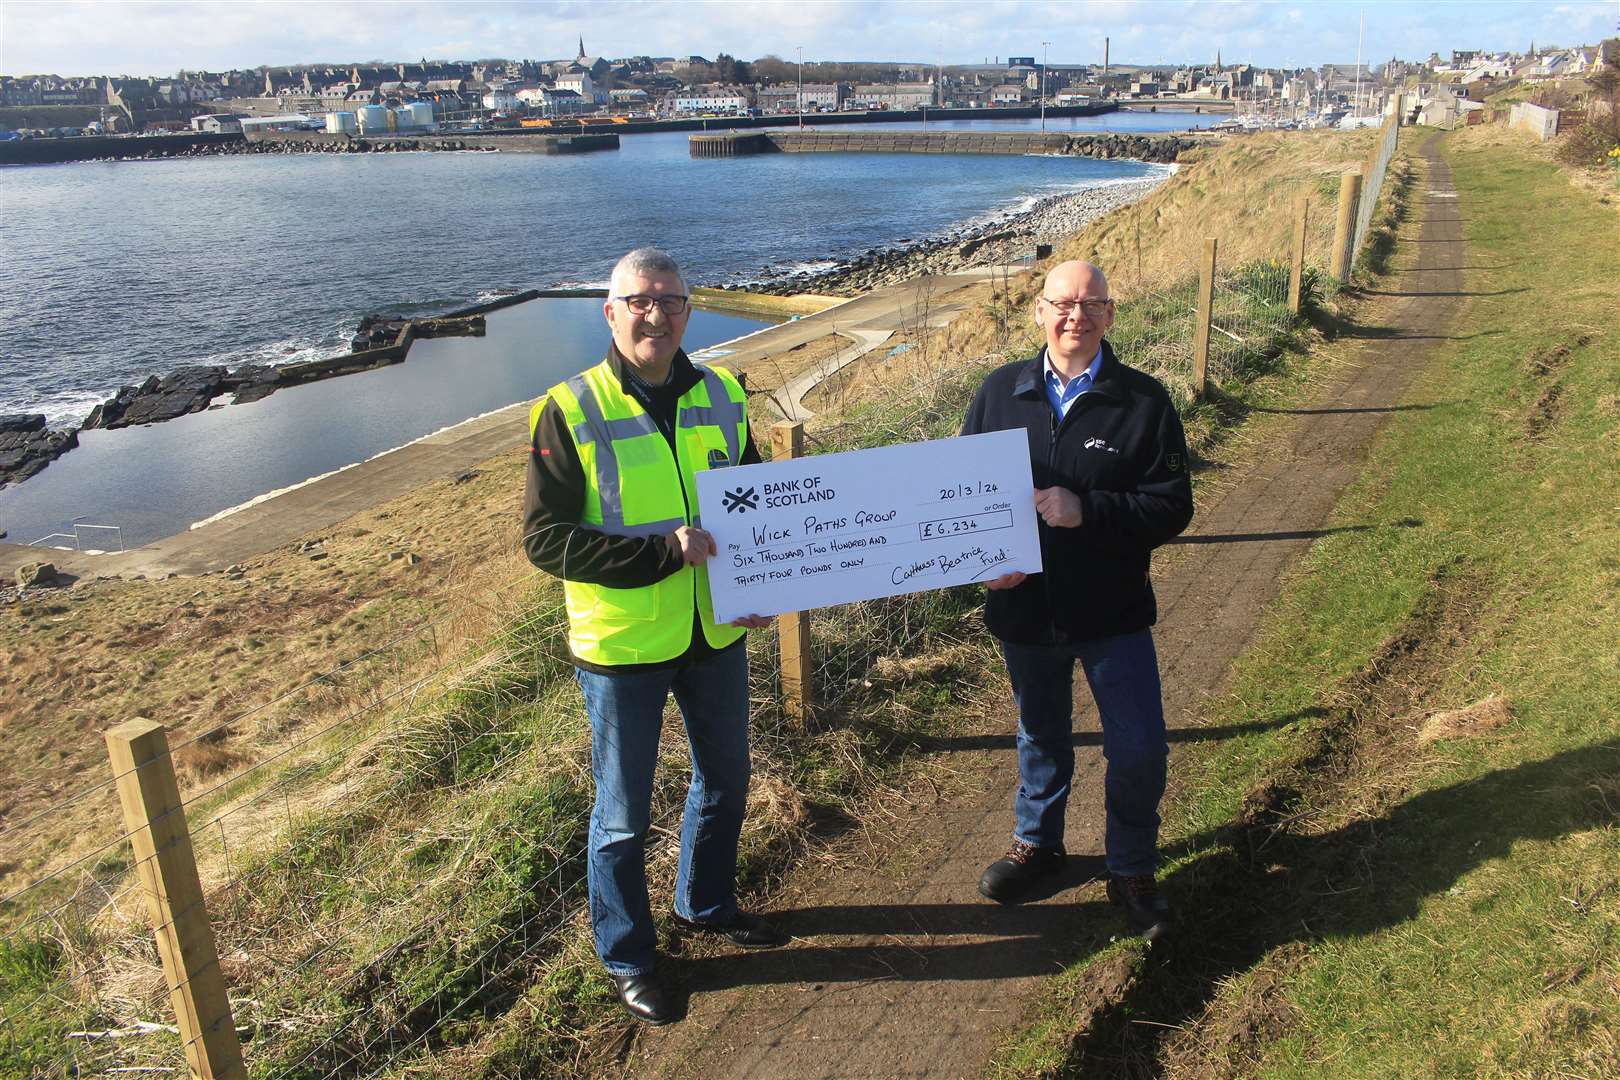 Willie Watt (left), chairman of Wick Paths Group, accepting the Caithness Beatrice Community Fund cheque from David Shearer, SSE Renewables community investment manager. Picture: Alan Hendry